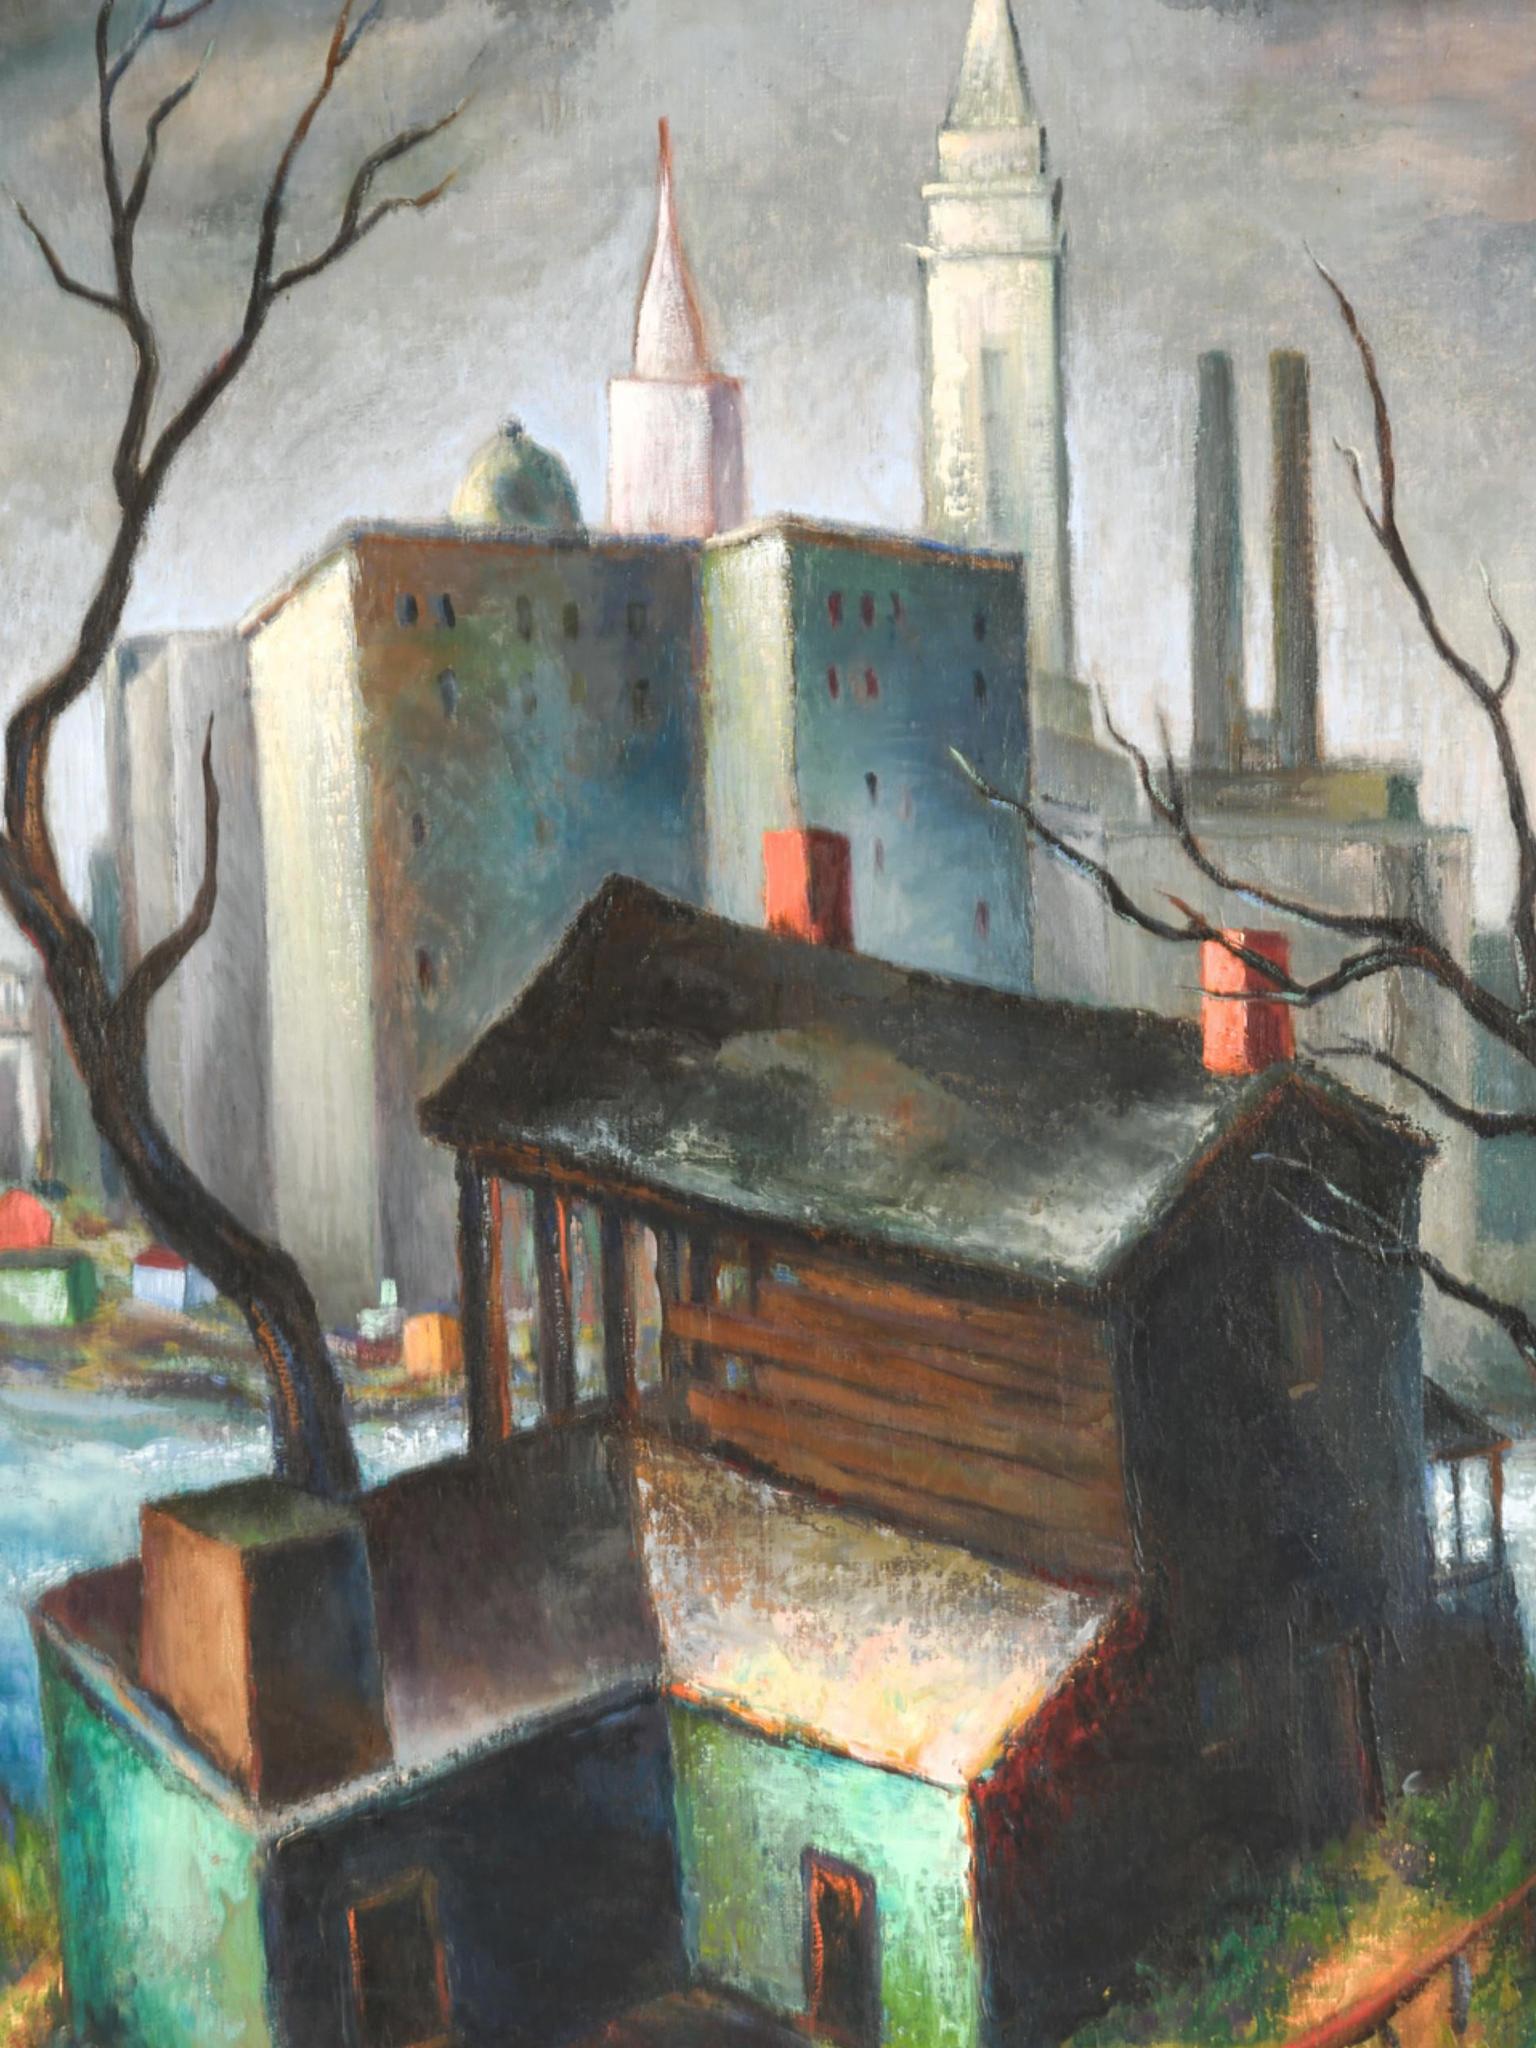 Created in the 1940s, this painting has an air of nostalgia and foreboding. It depicts a house set against the backdrop of not-so-distant skyscrapers. The city fades into gray in contrast to the house which looms large in the foreground, a house you